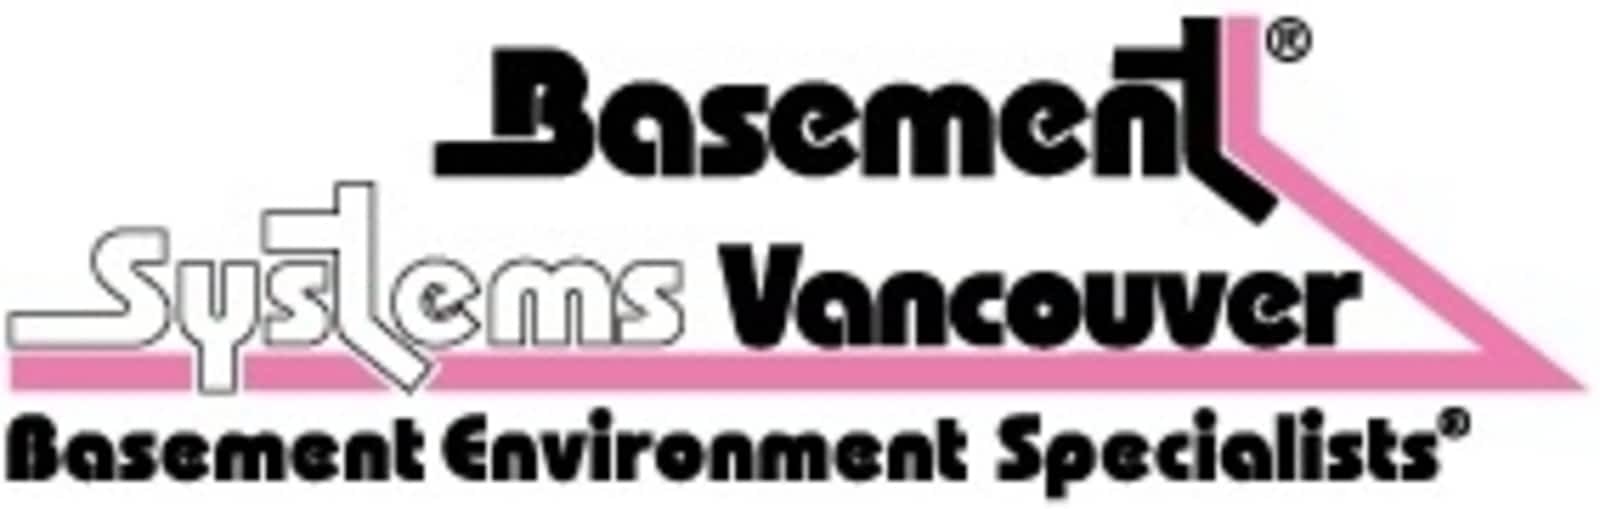 Basement Systems Vancouver Opening Hours